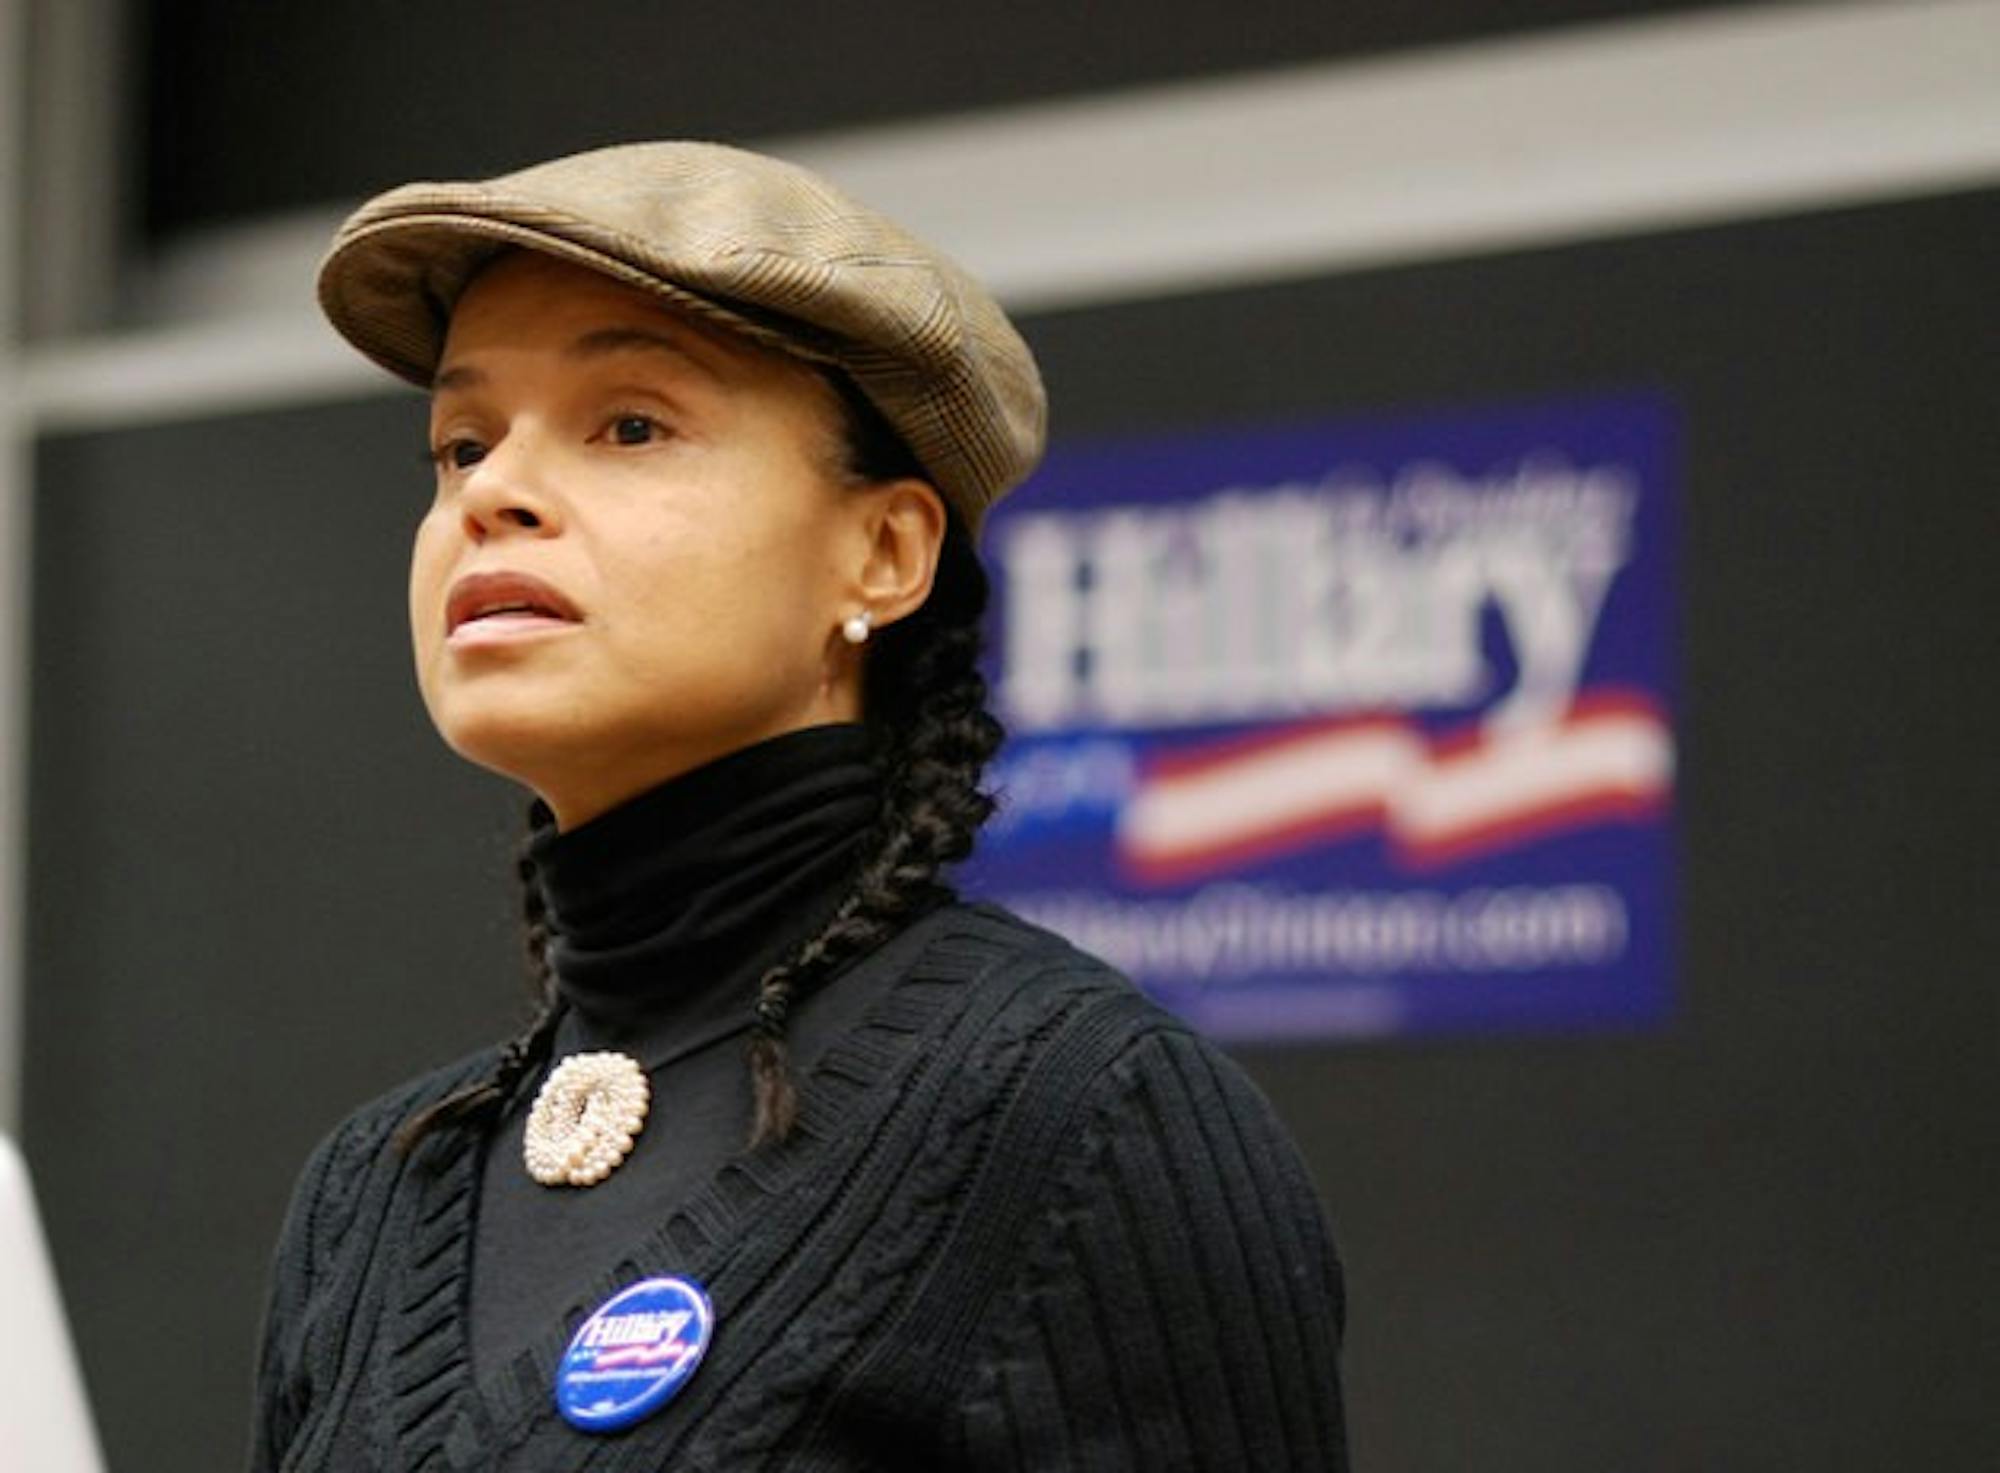 Actress Victoria Rowell said that Hillary Clinton is the best candidate on health care and could help America restore its diplomatic relations.